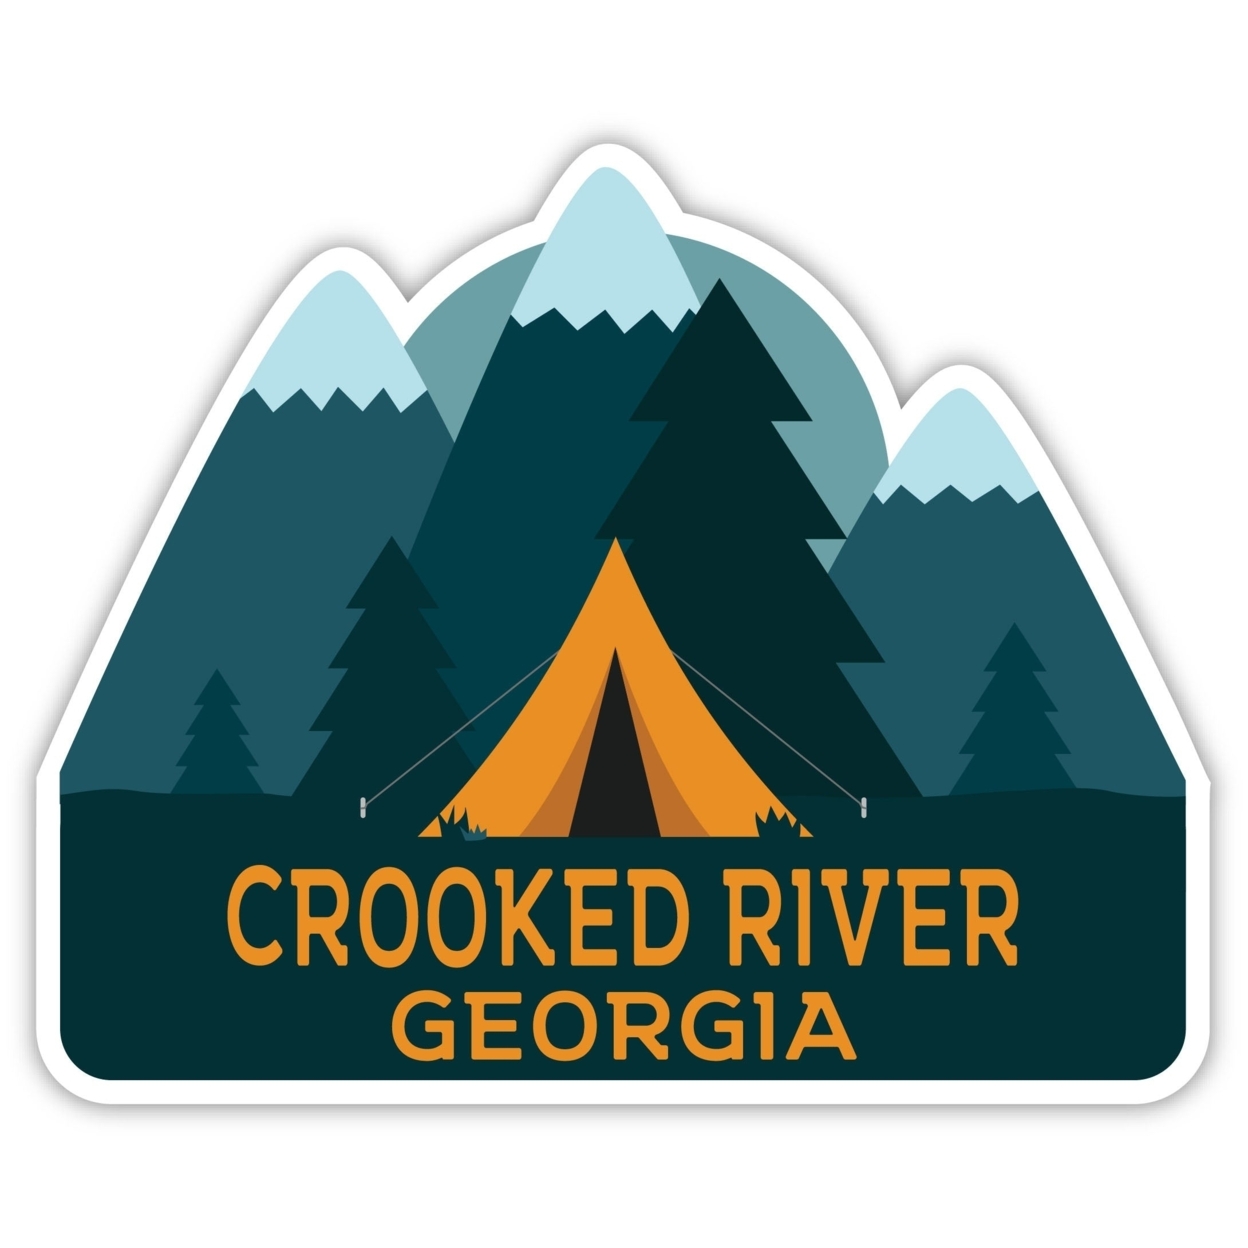 Crooked River Georgia Souvenir Decorative Stickers (Choose Theme And Size) - 4-Pack, 4-Inch, Tent